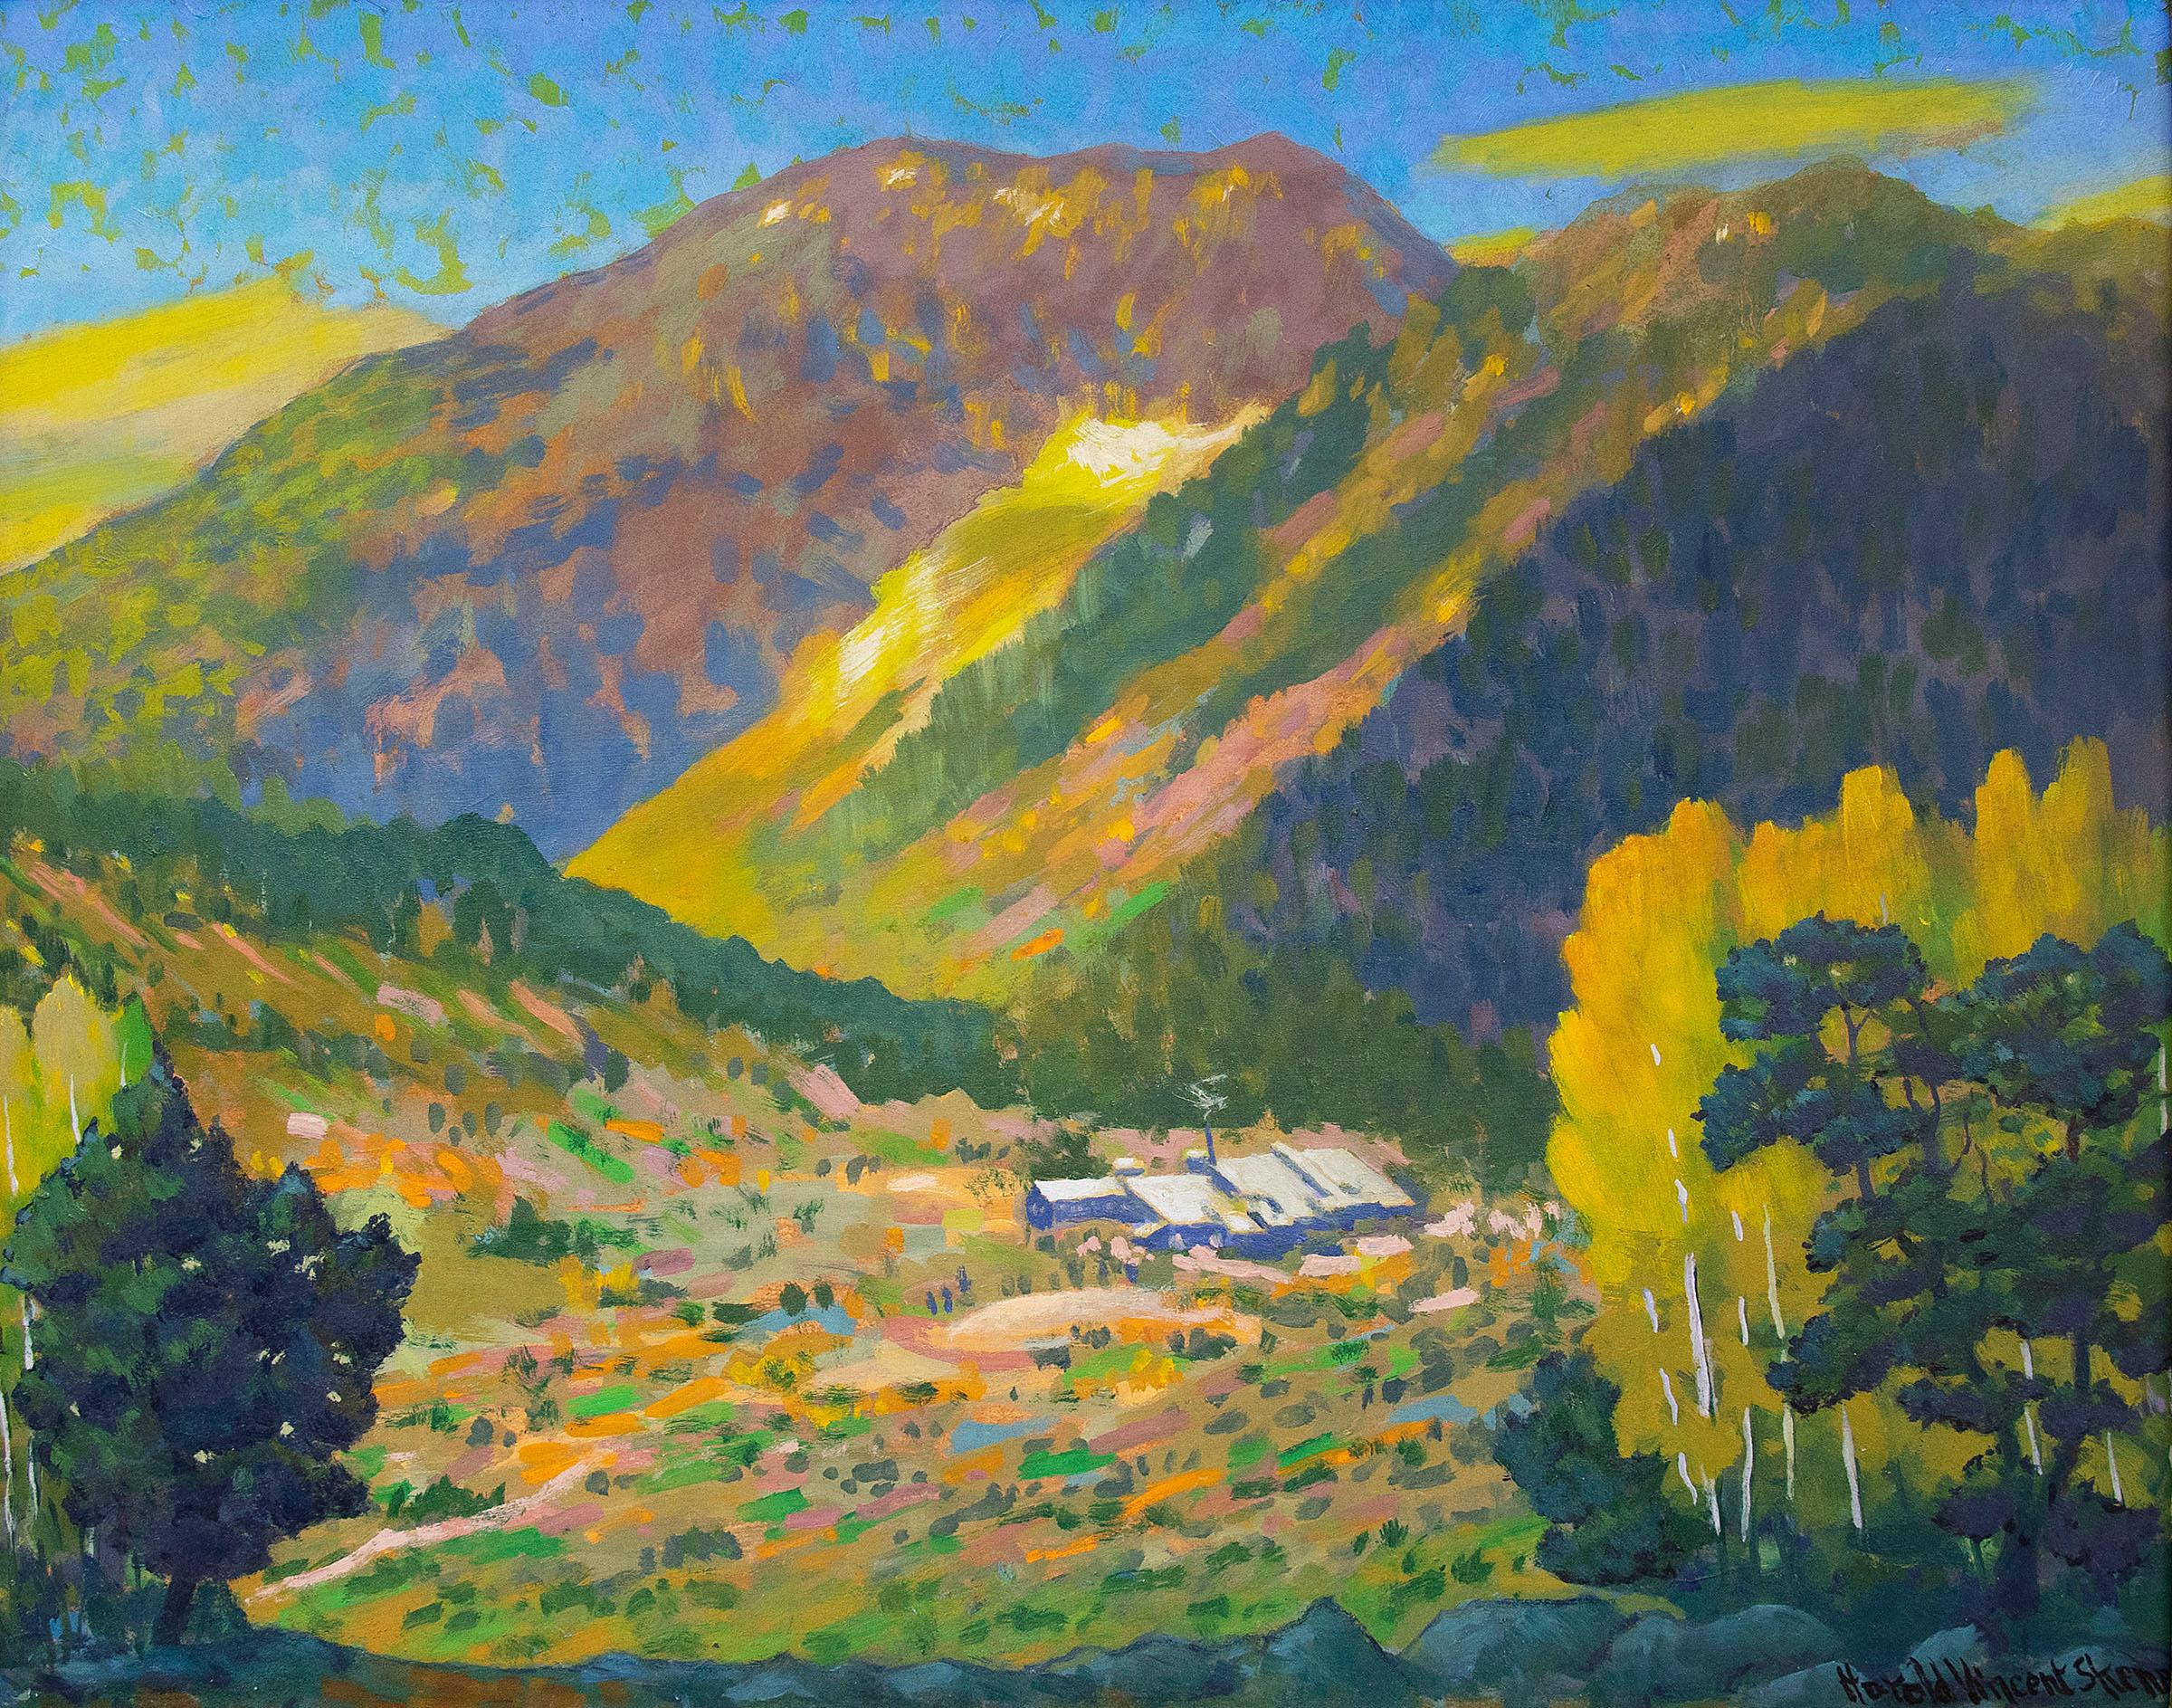 Camp Bird Mine, Ouray, Colorado, Mountain Landscape in Green, Yellow, Blue - Painting by Harold Vincent Skene